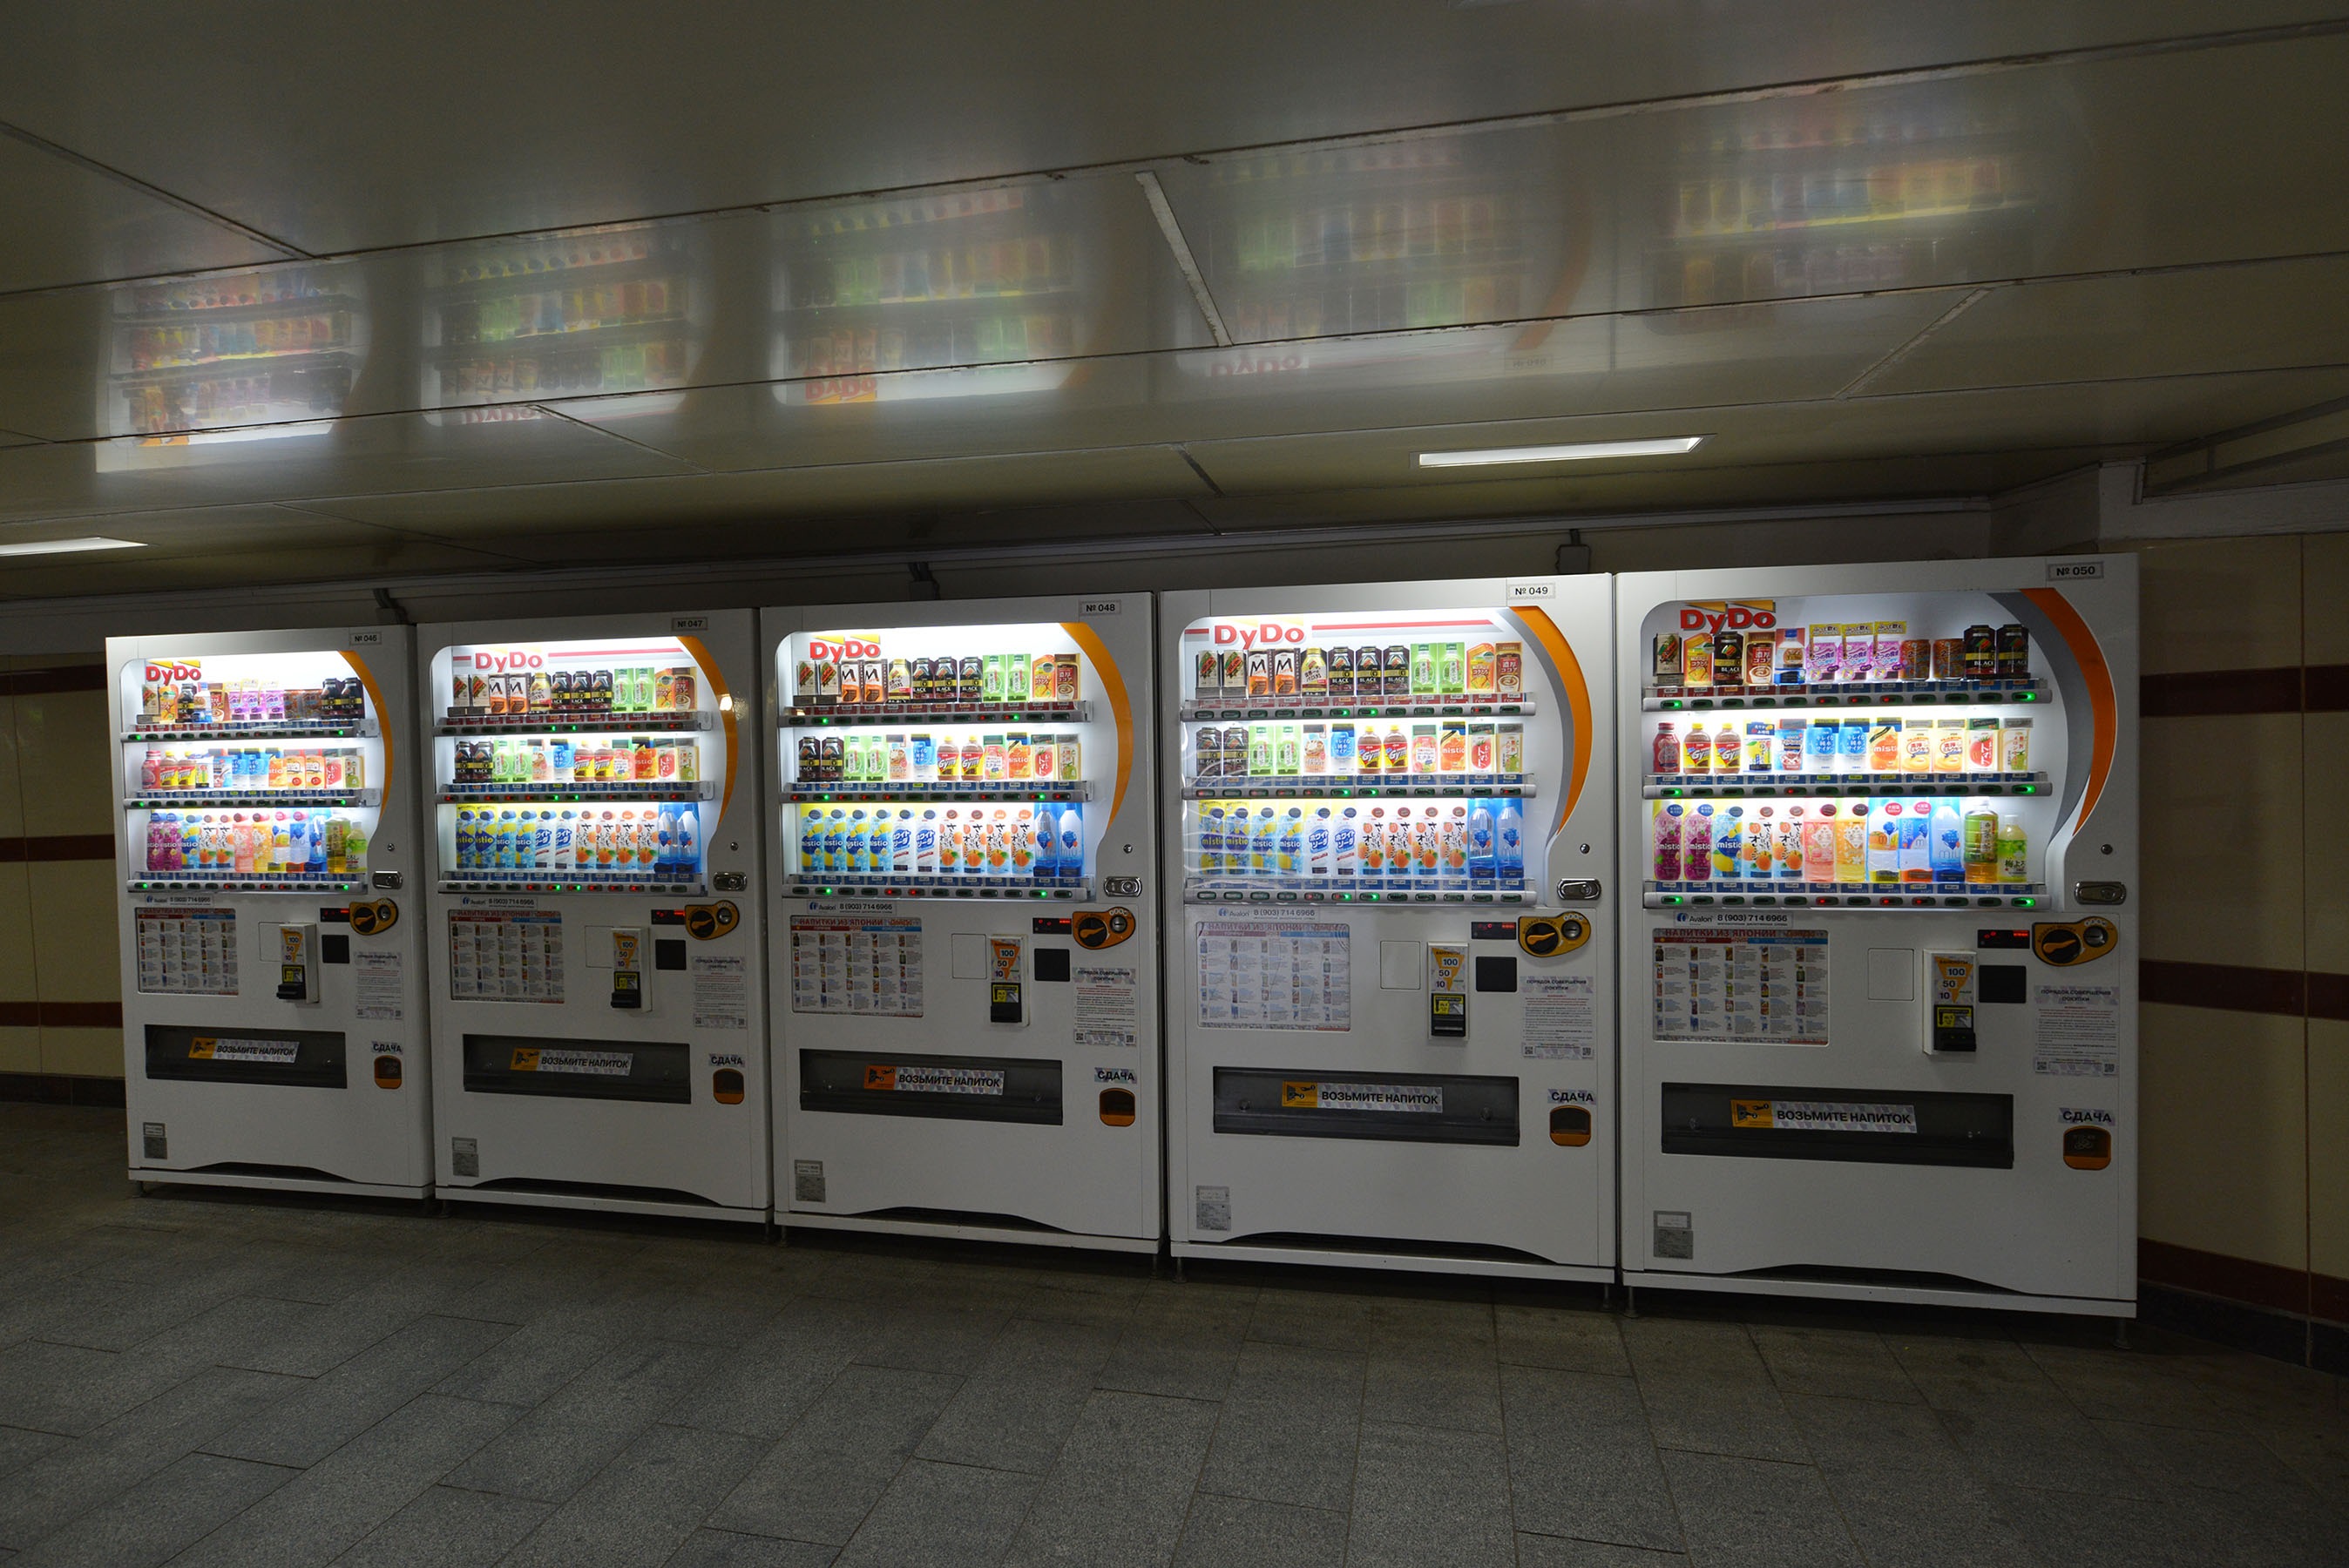 On the ancient origins of Vending Machines